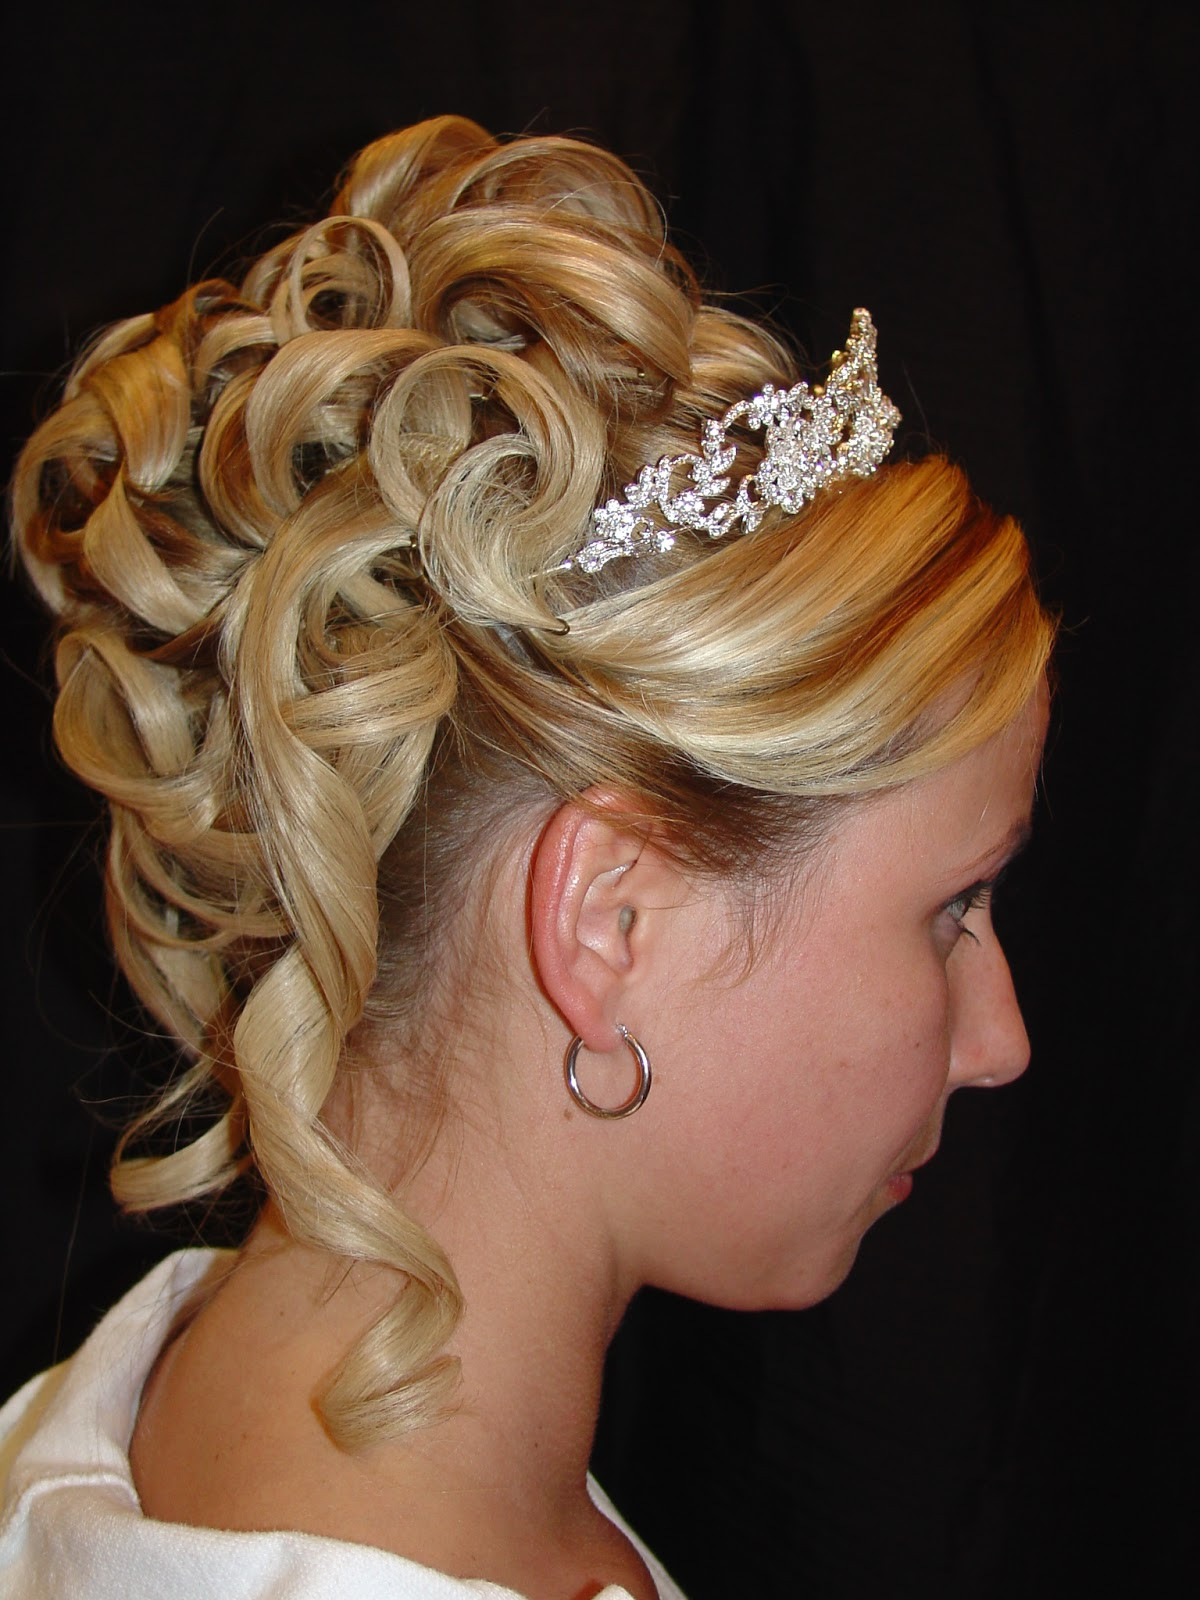 Wedding Updo Hairstyles Pictures
 Style Dhoom Special Events UpDo Wedding Hairstyles